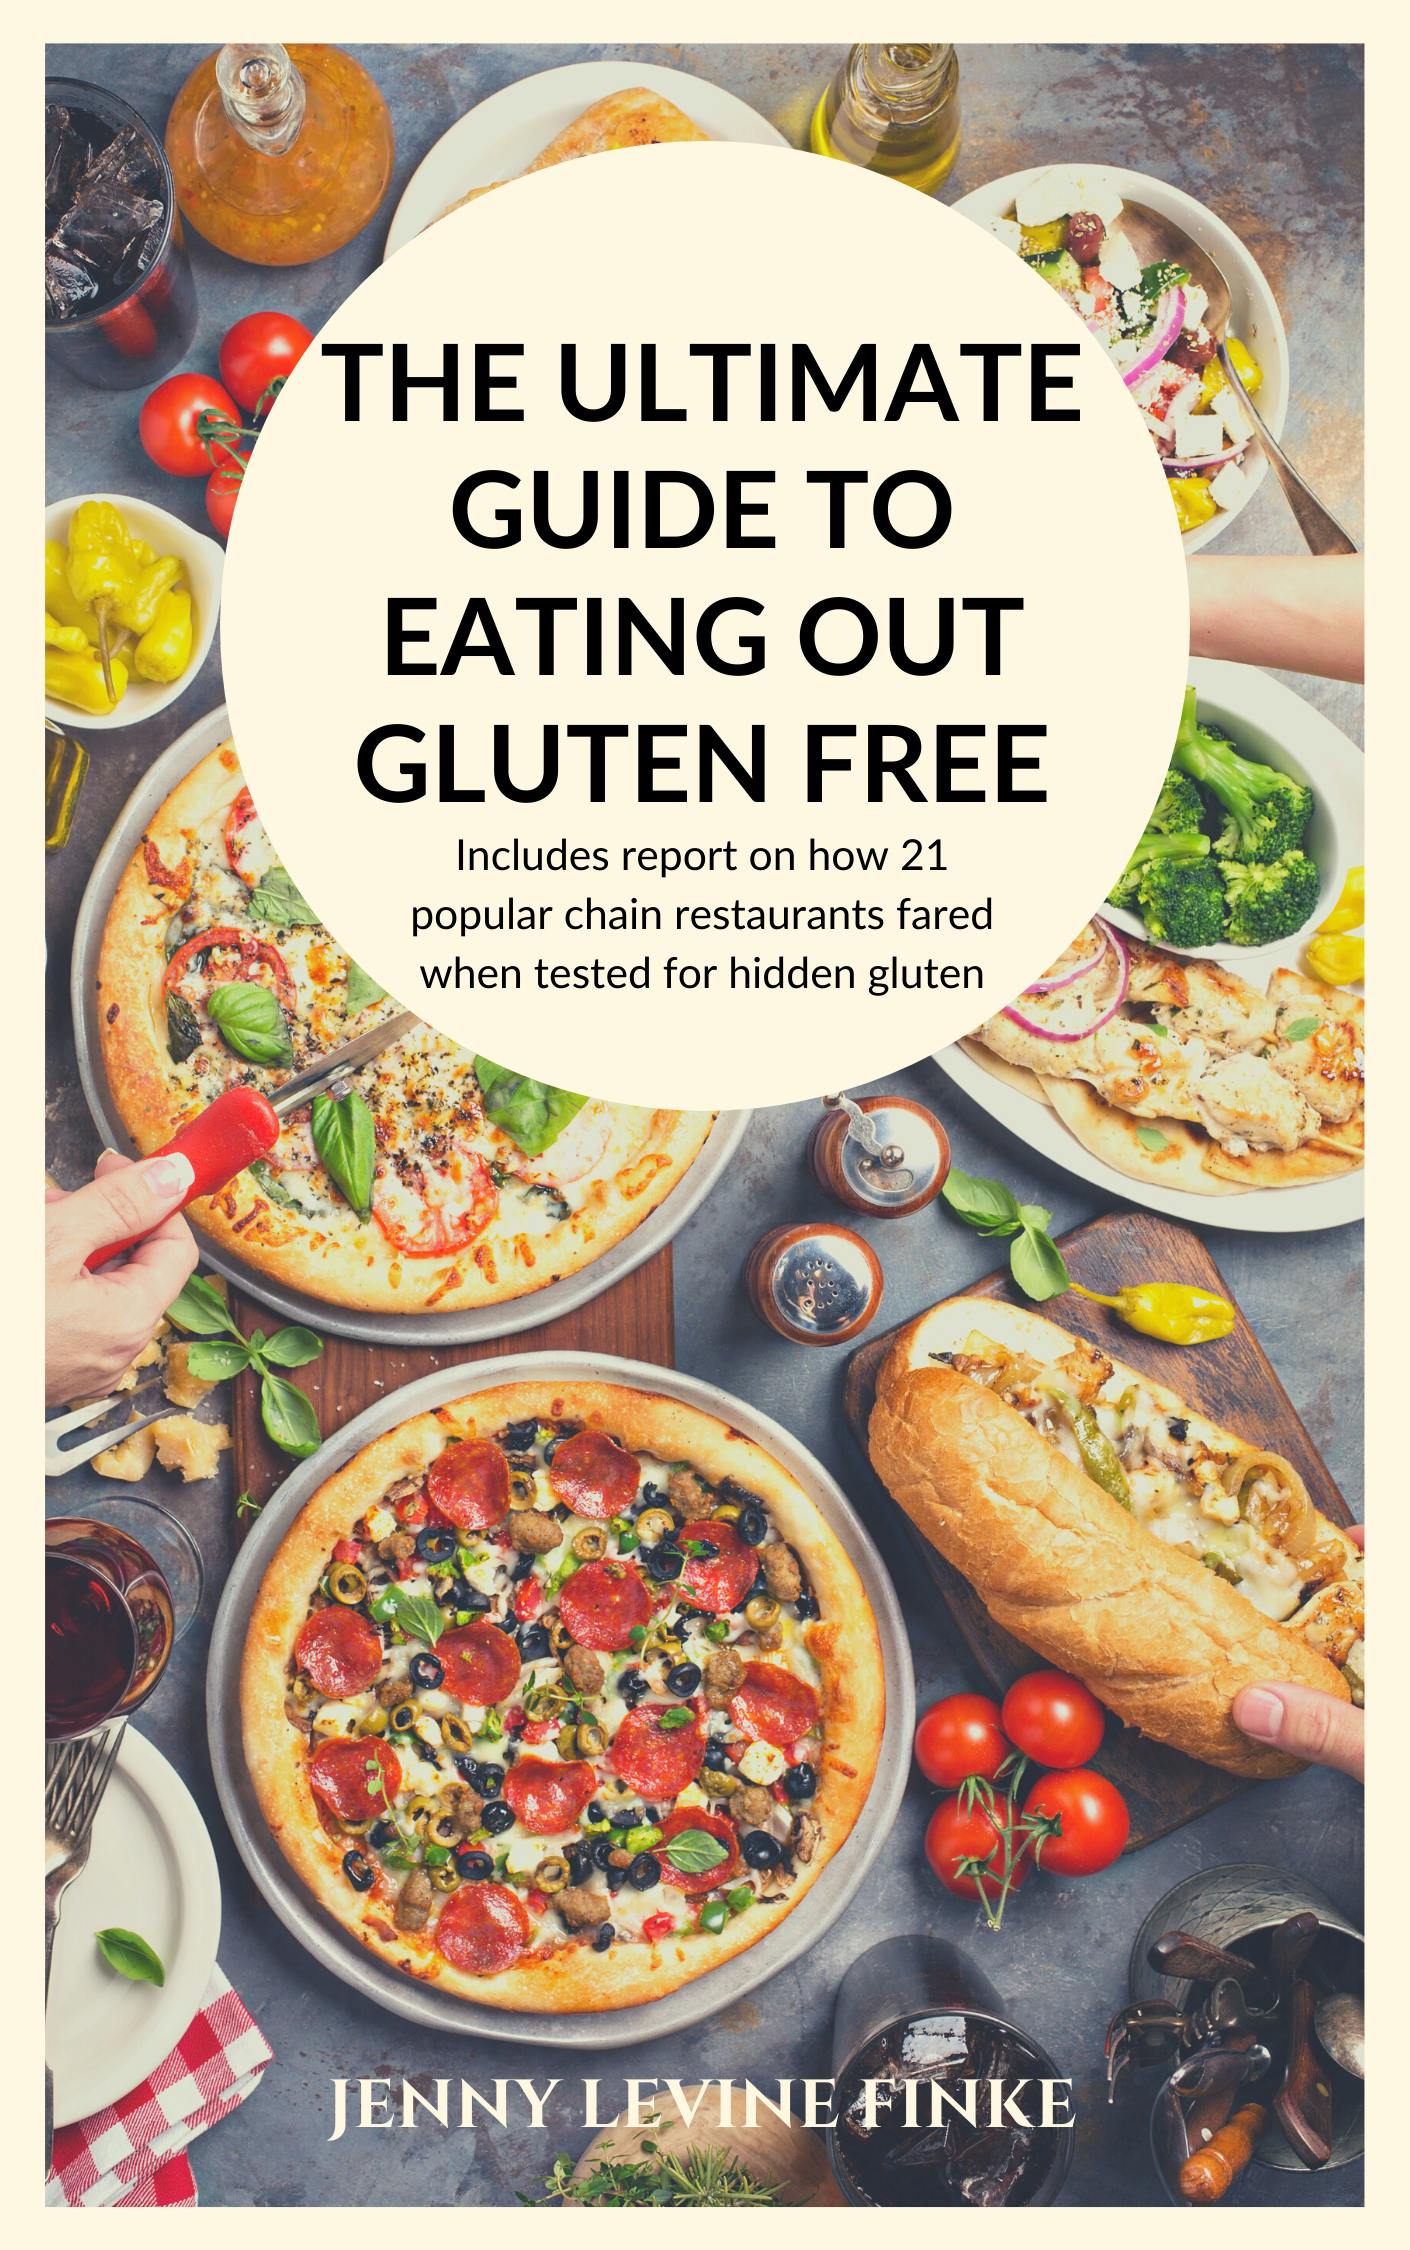 The Ultimate Guide to Eating Out Gluten Free